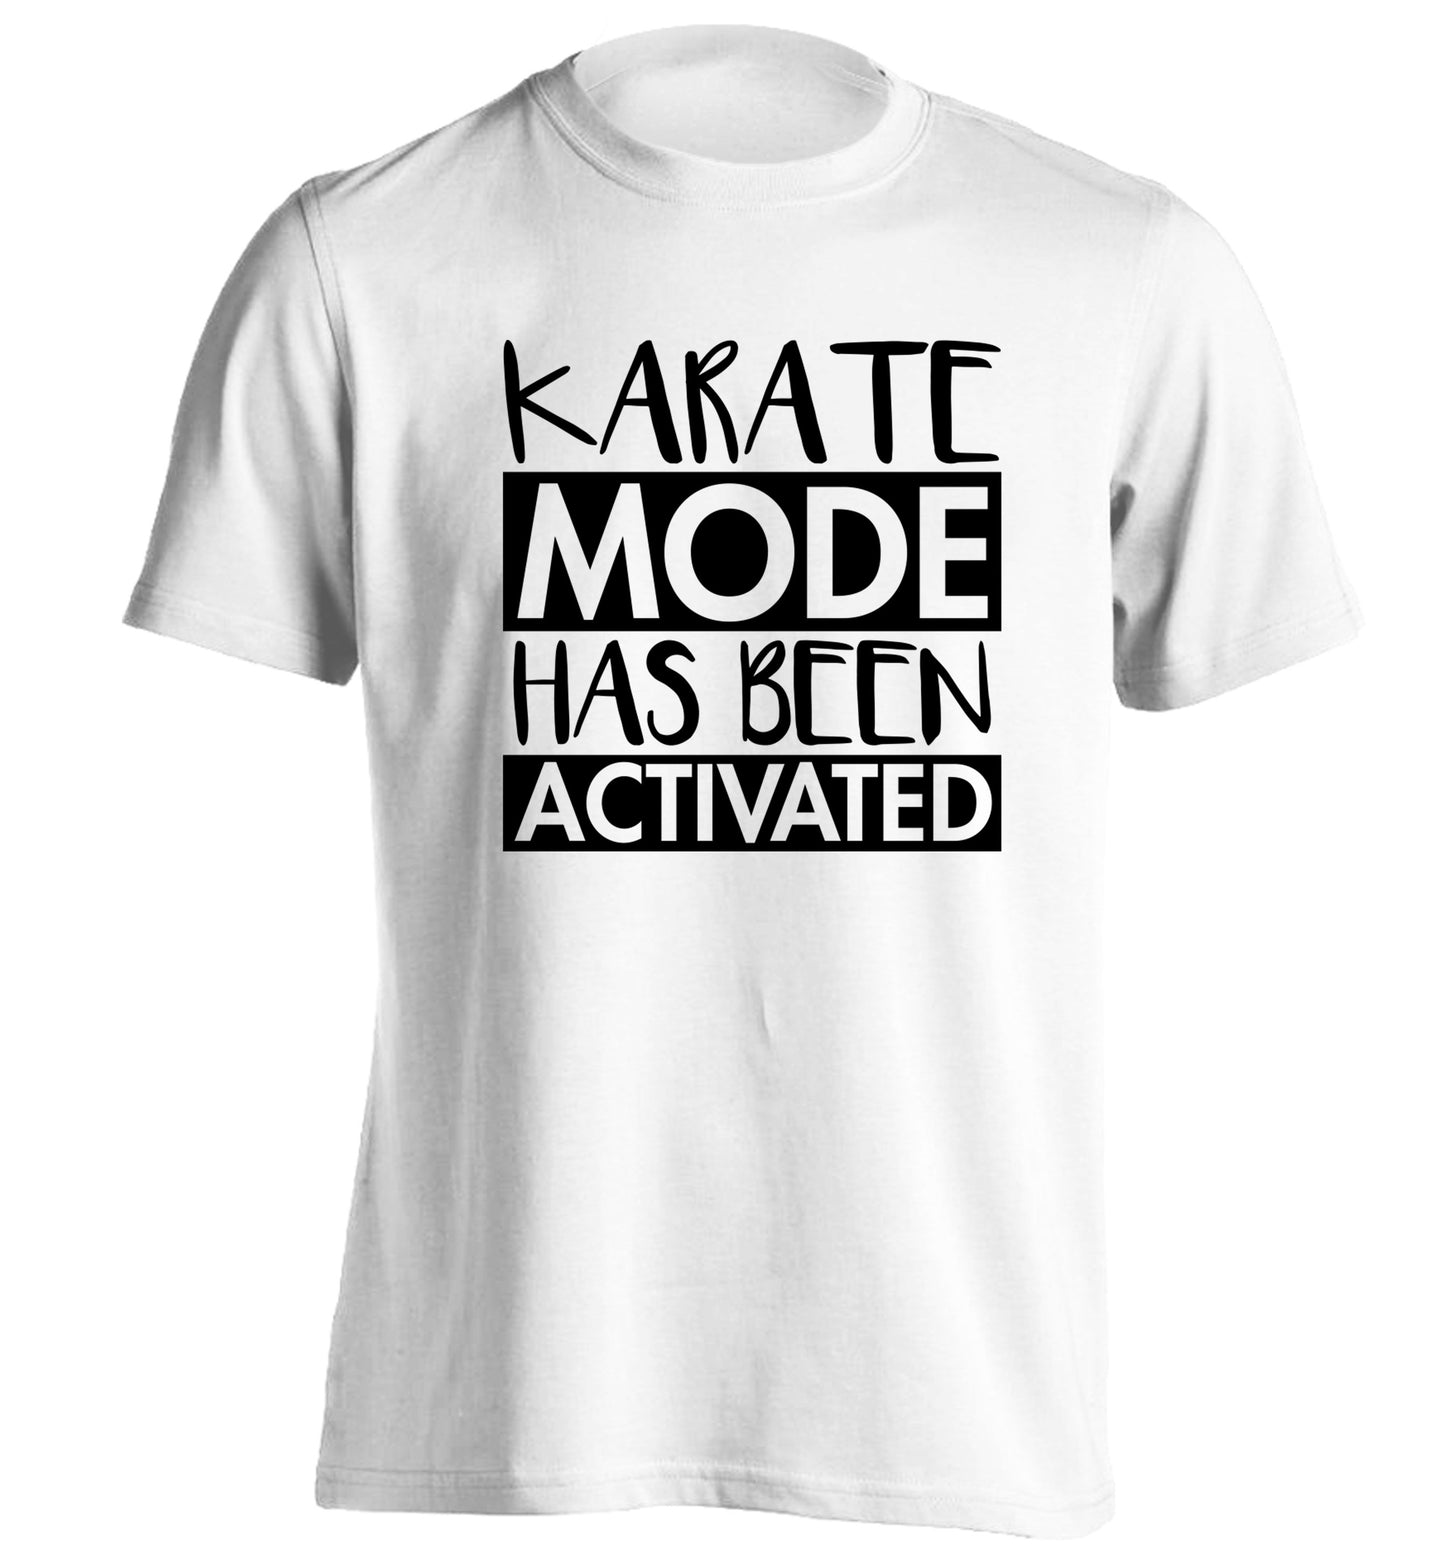 Karate mode activated adults unisex white Tshirt 2XL